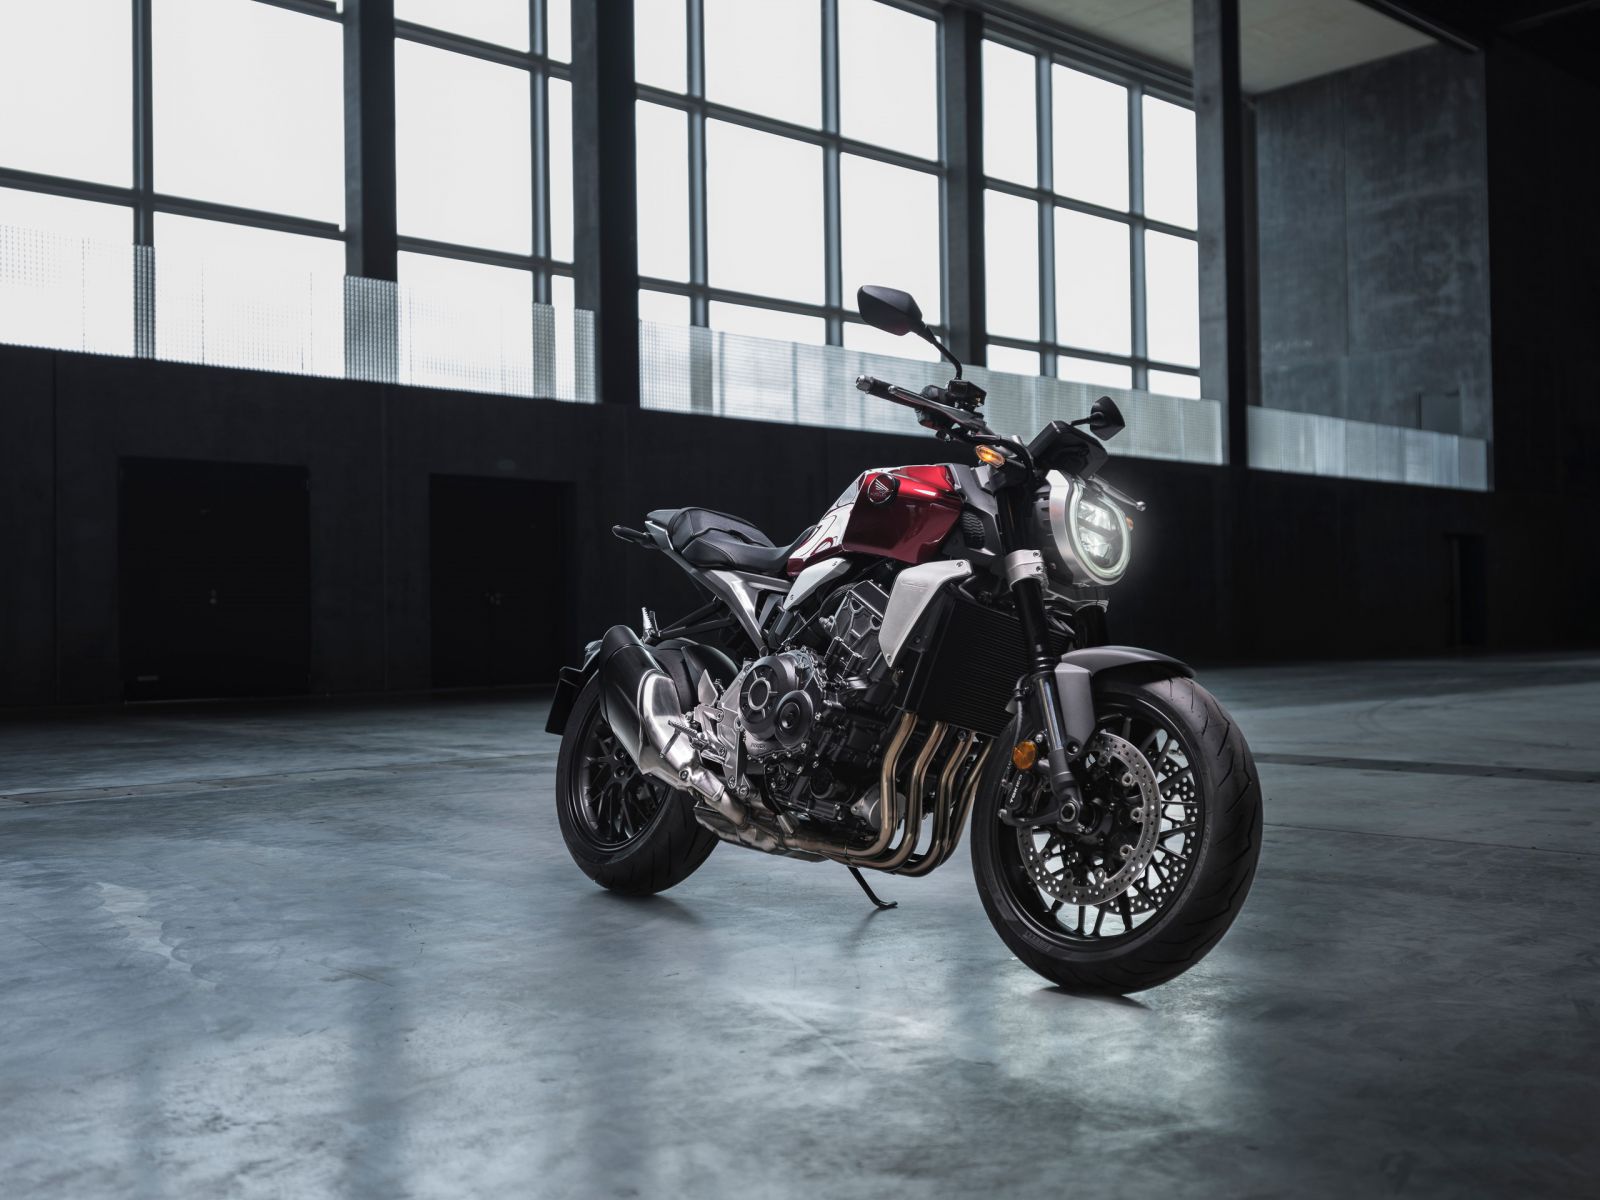 HONDA CB1000R 2021  on Review  MCN